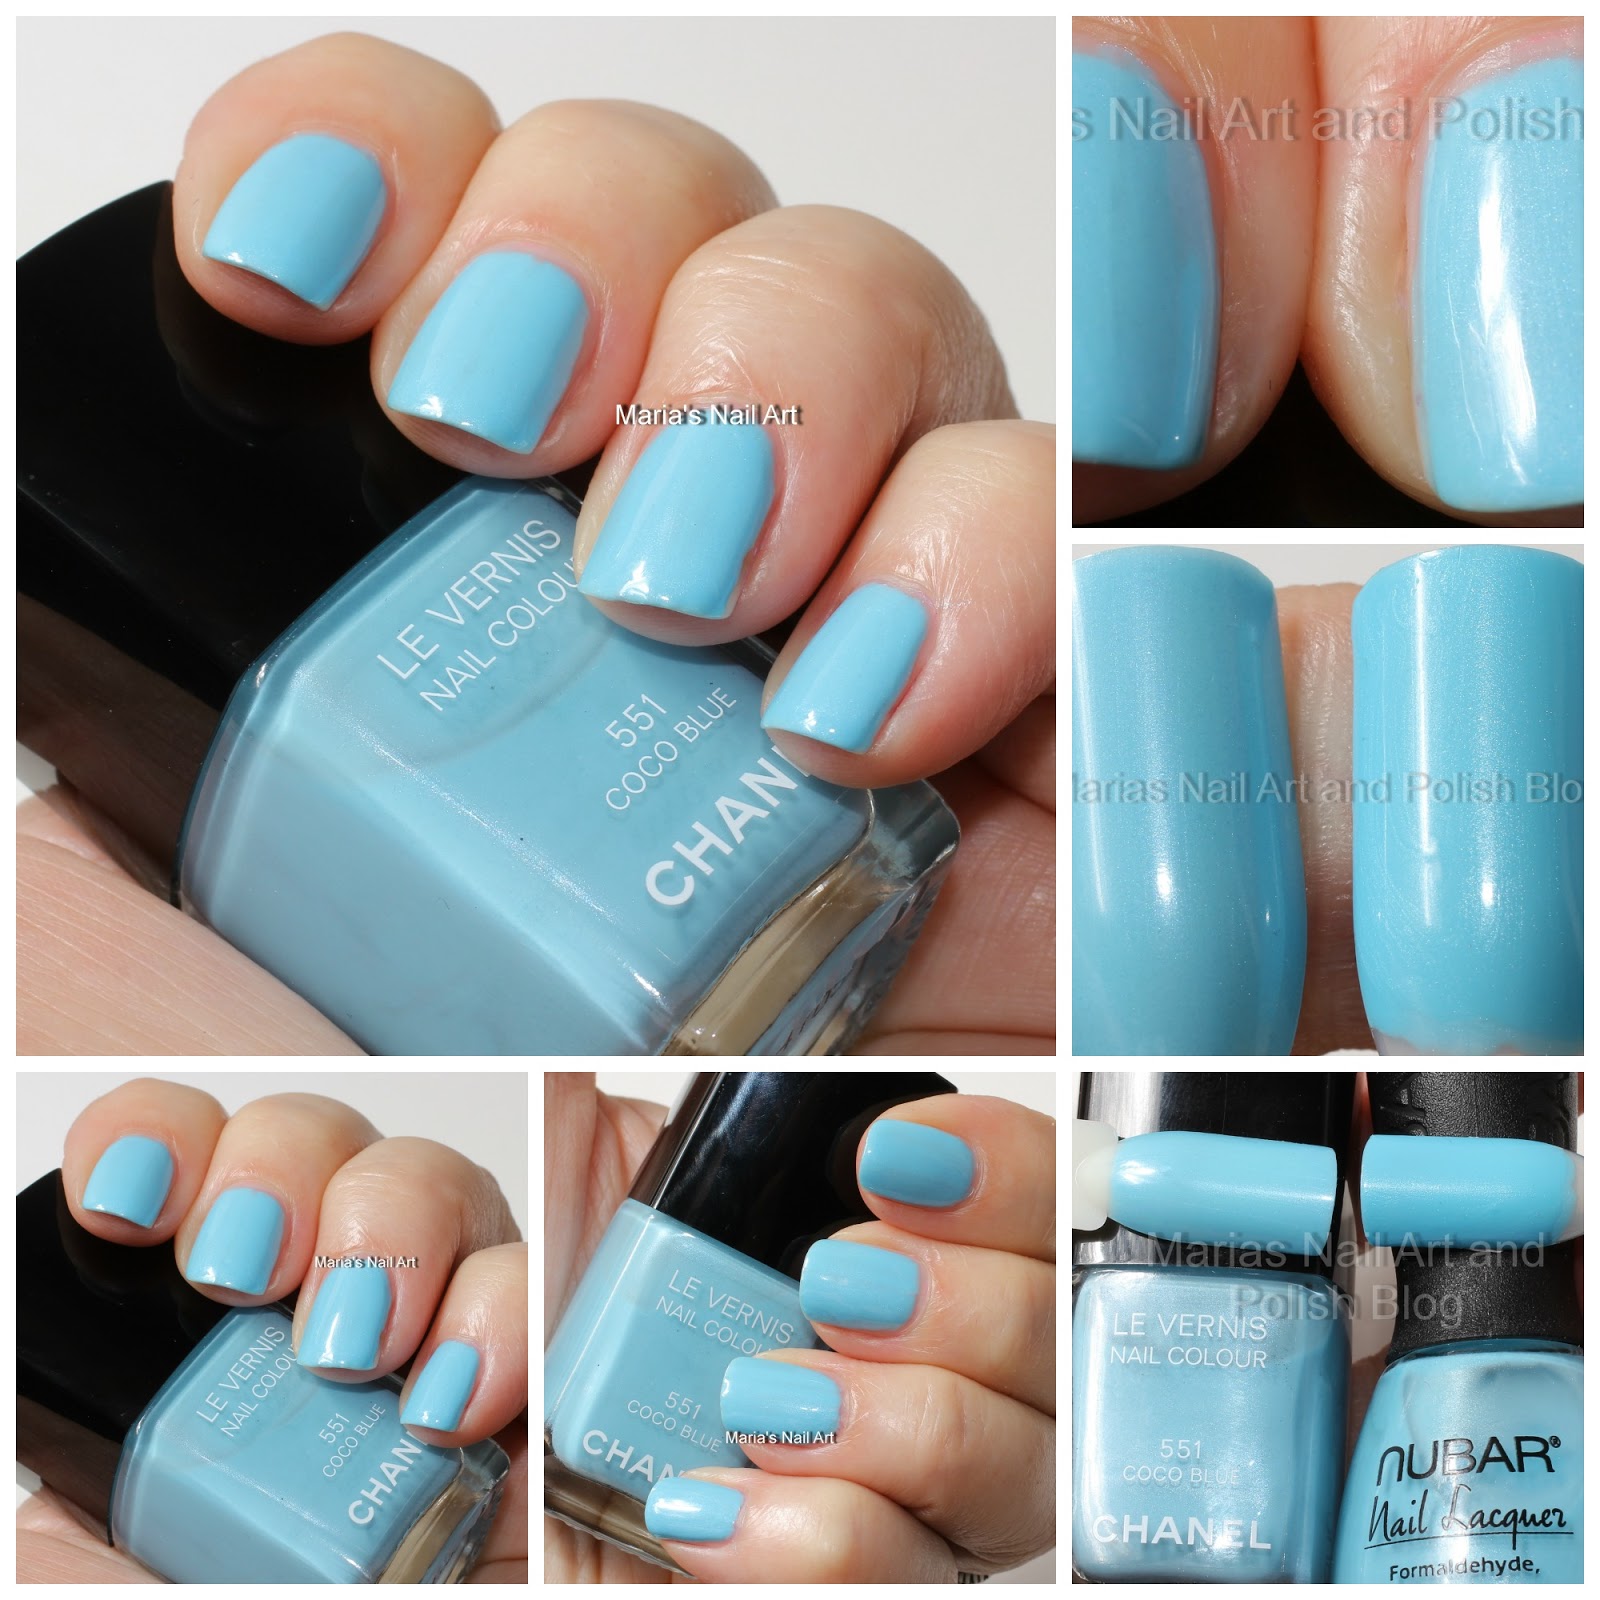 Marias Nail Art Polish Chanel Coco Blue 551 - Les Jeans coll. swatches - Chanel